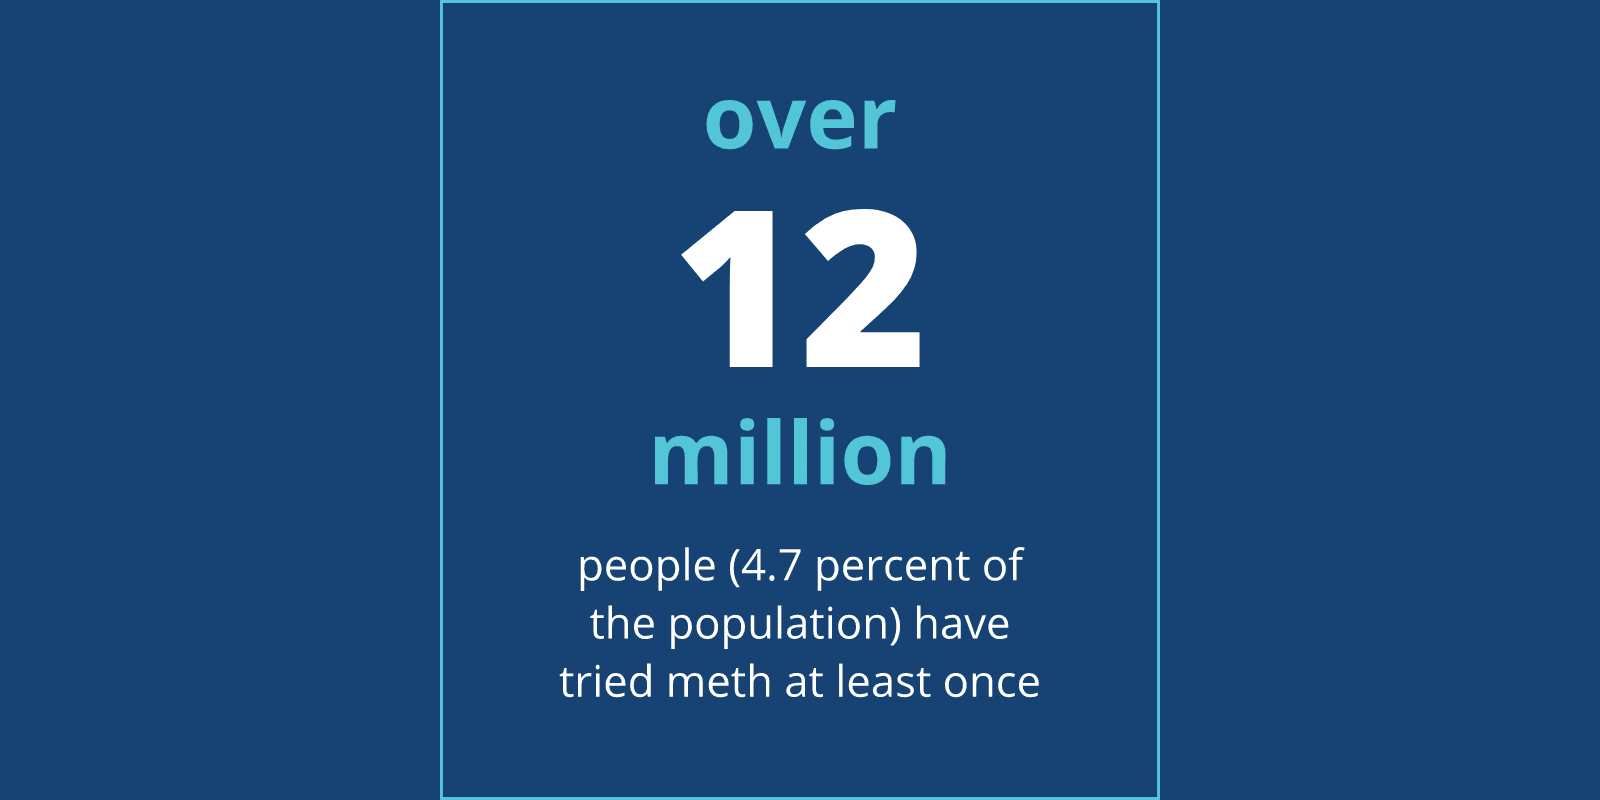 over 12 million people (4.7 percent of the population) have tried meth at least once